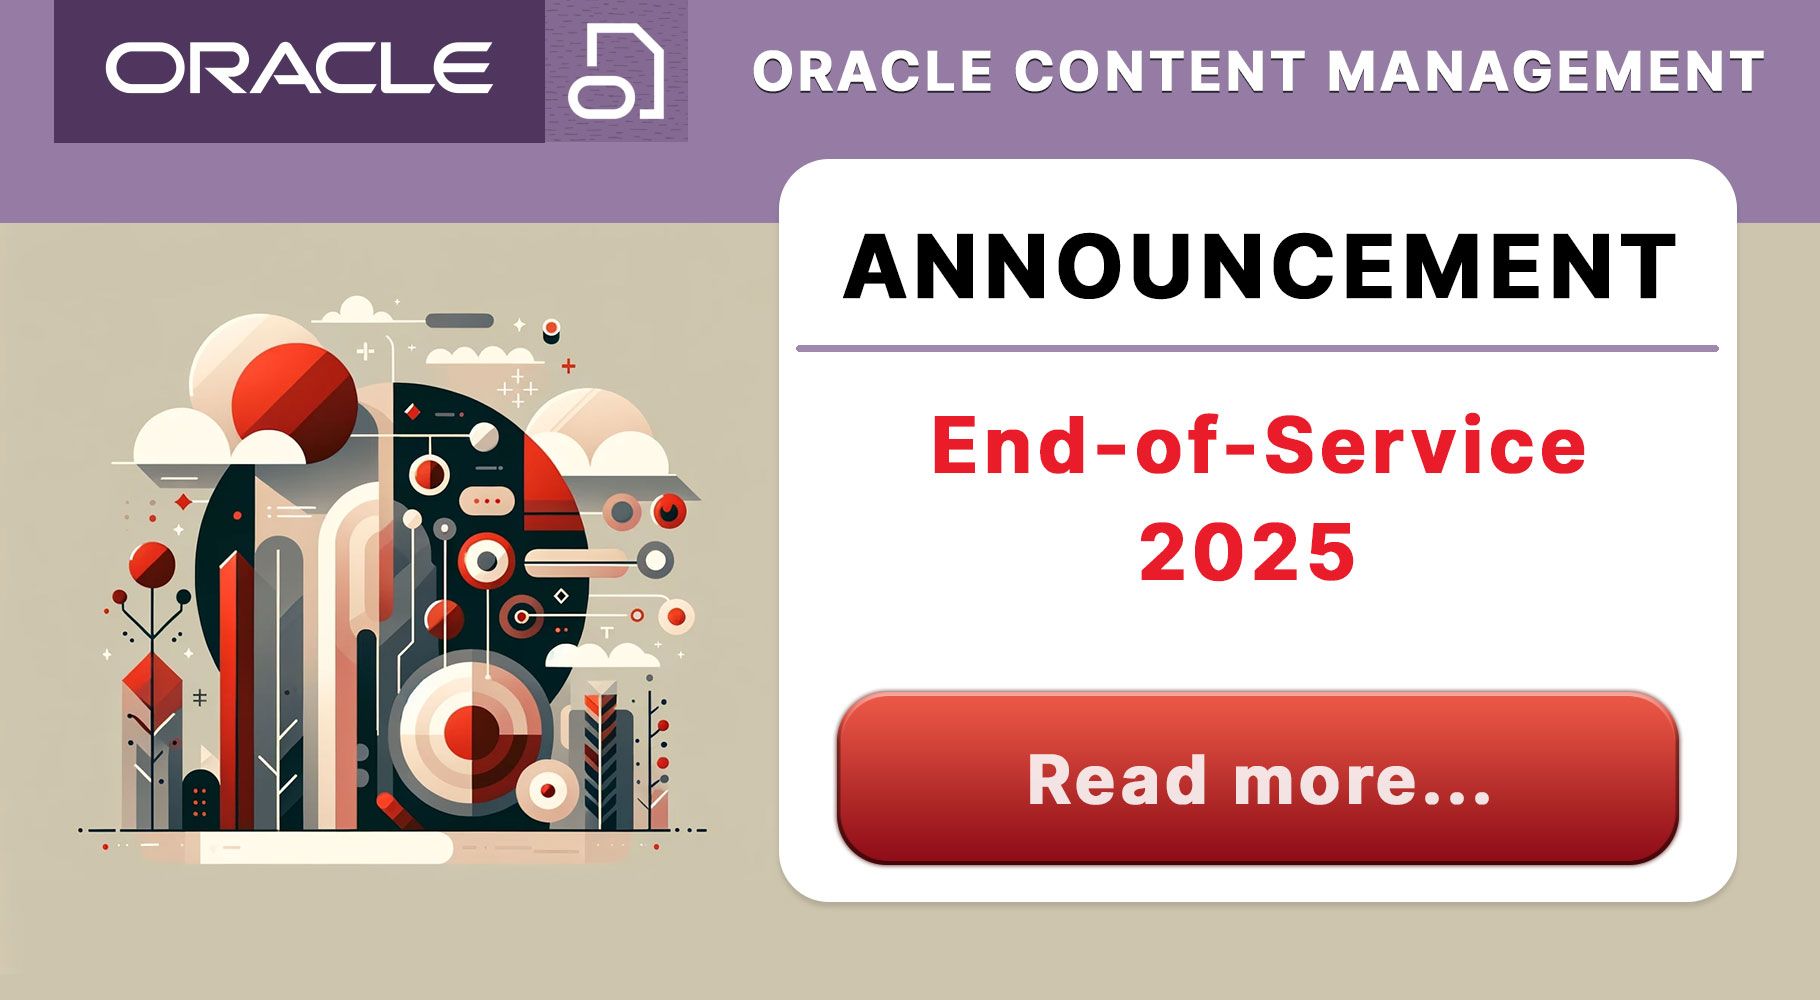 Embrace the Future Beyond Oracle Content Management's End-of-Service in 2025